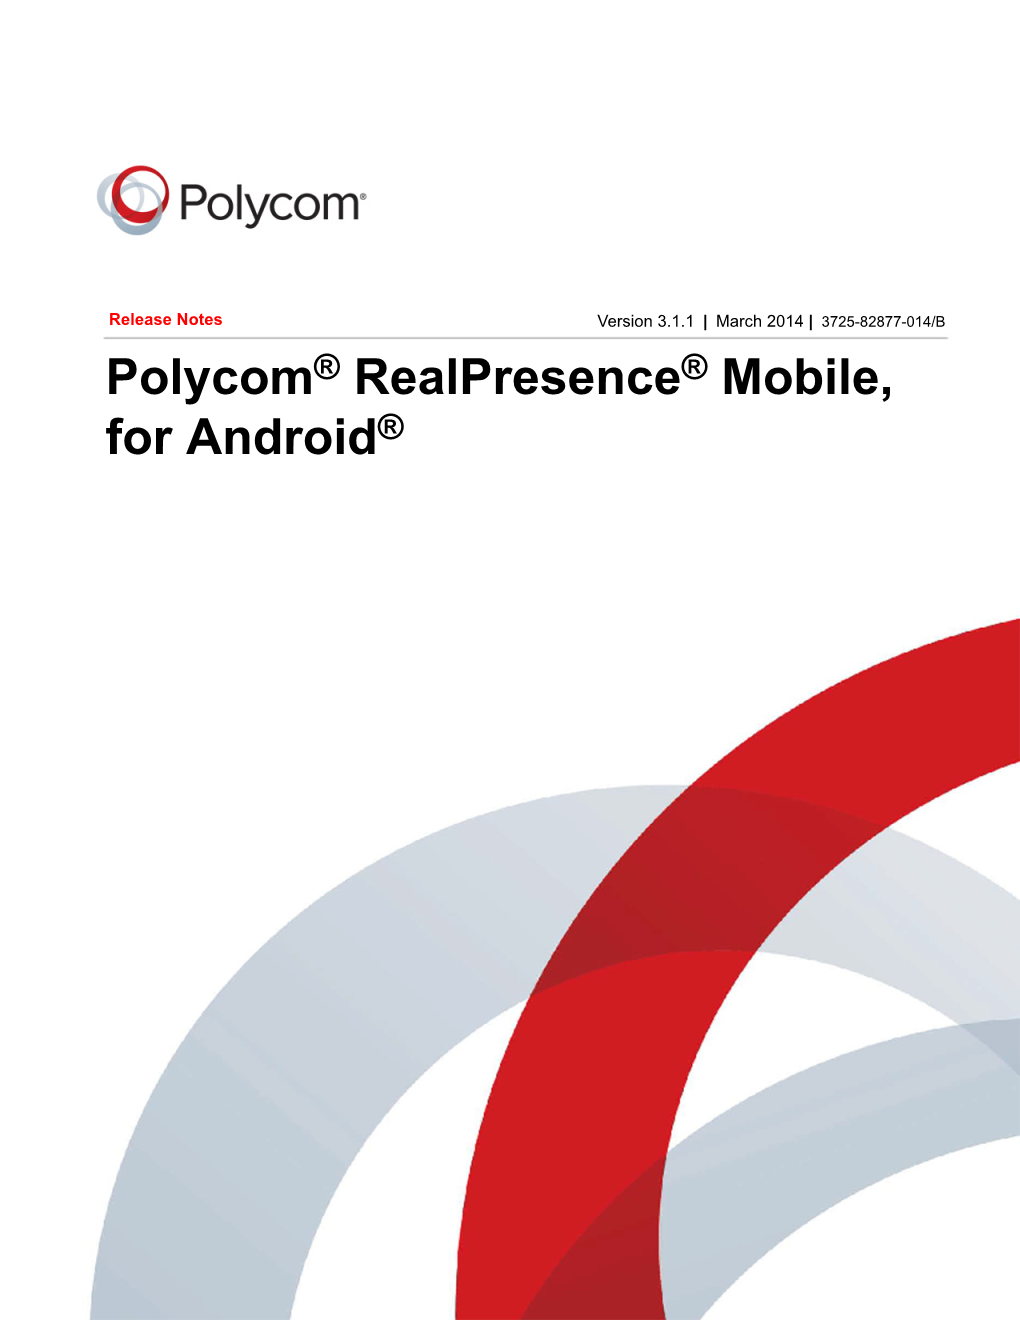 Polycom Realpresence Mobile, for Android Release Notes